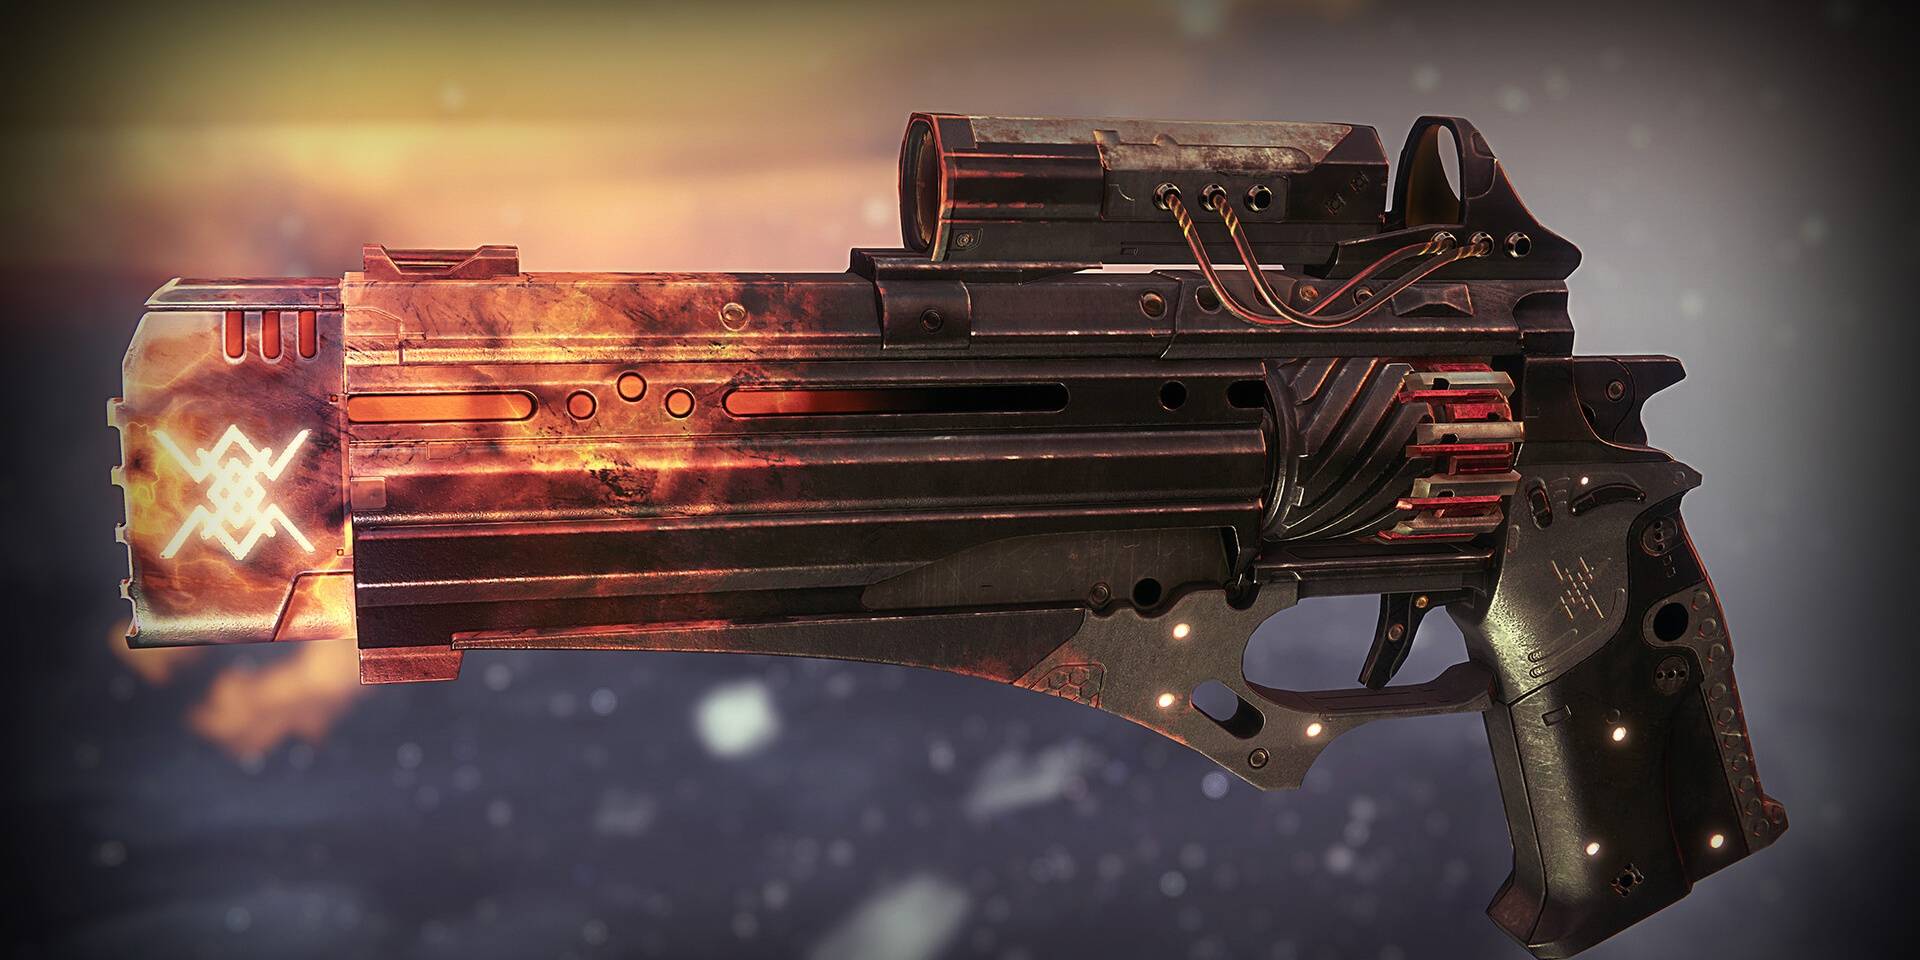 2: The 10 Best Hand Cannons For PvE